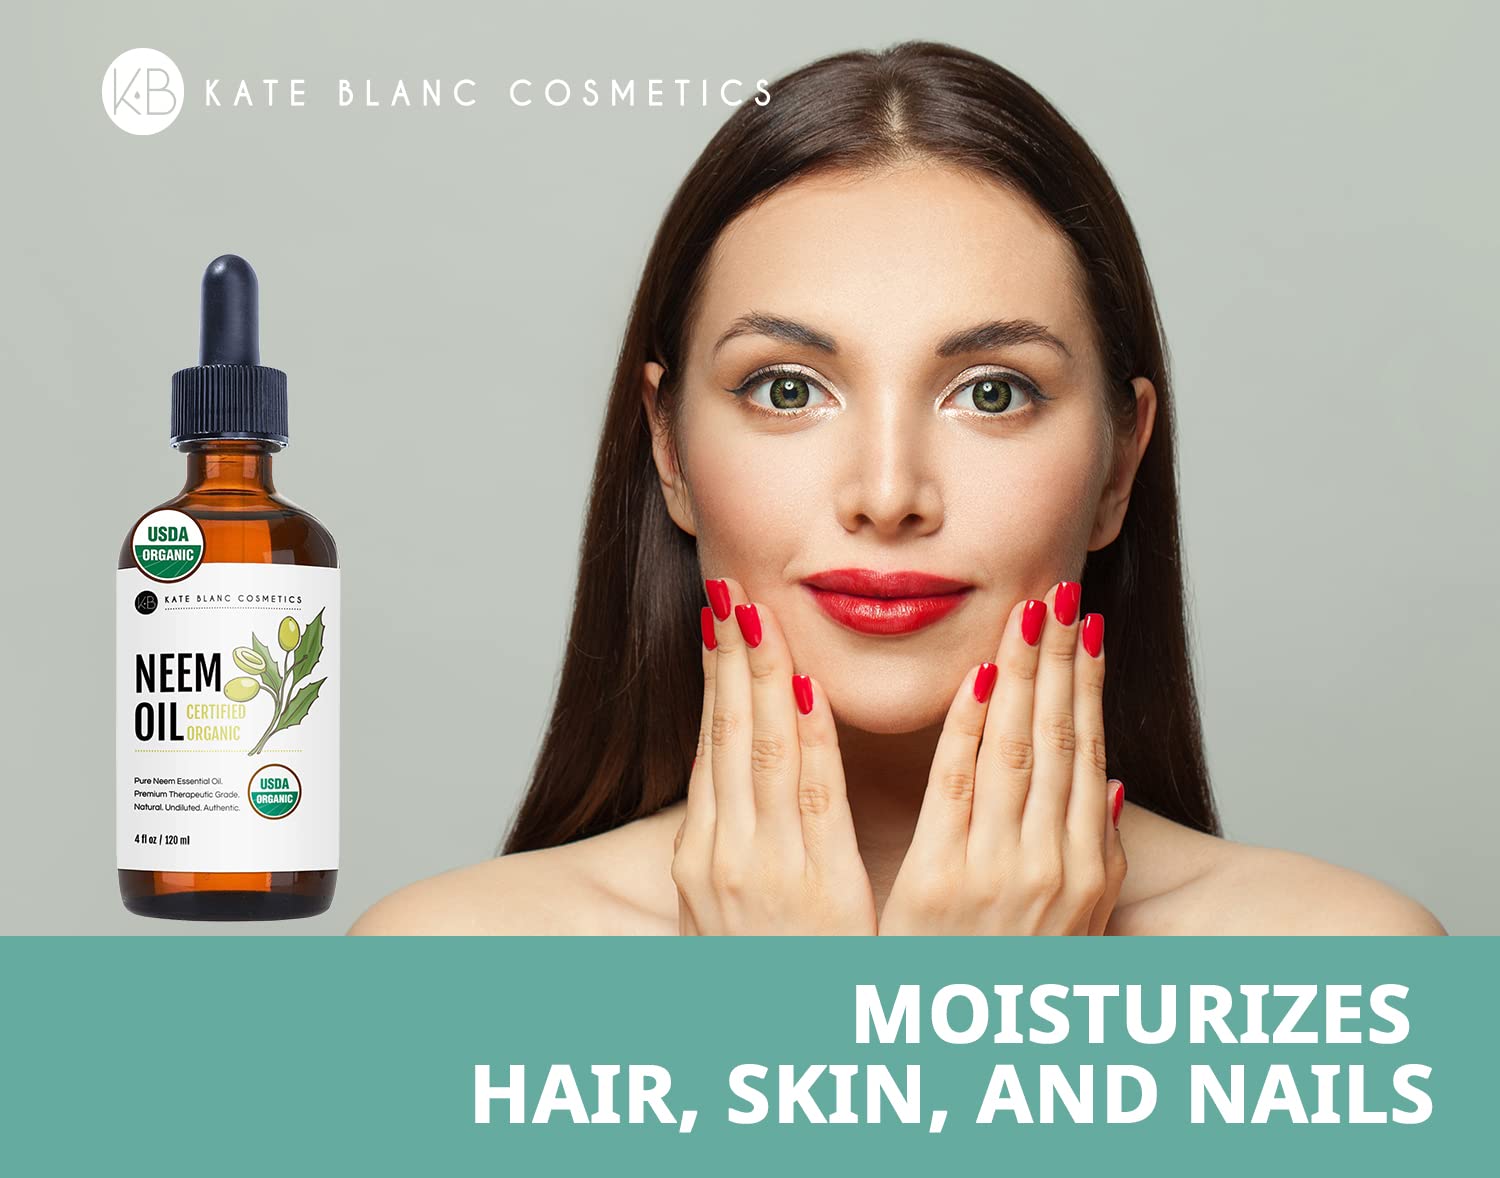 Kate Blanc Cosmetics Neem Oil for Skin (4oz) Natural & USDA Organic Neem Oil Concentrate. 100% Pure Neem Oil for Hair Growth and Organic Neem Oil for Plants. Mixed with Water to Create Plant Spray